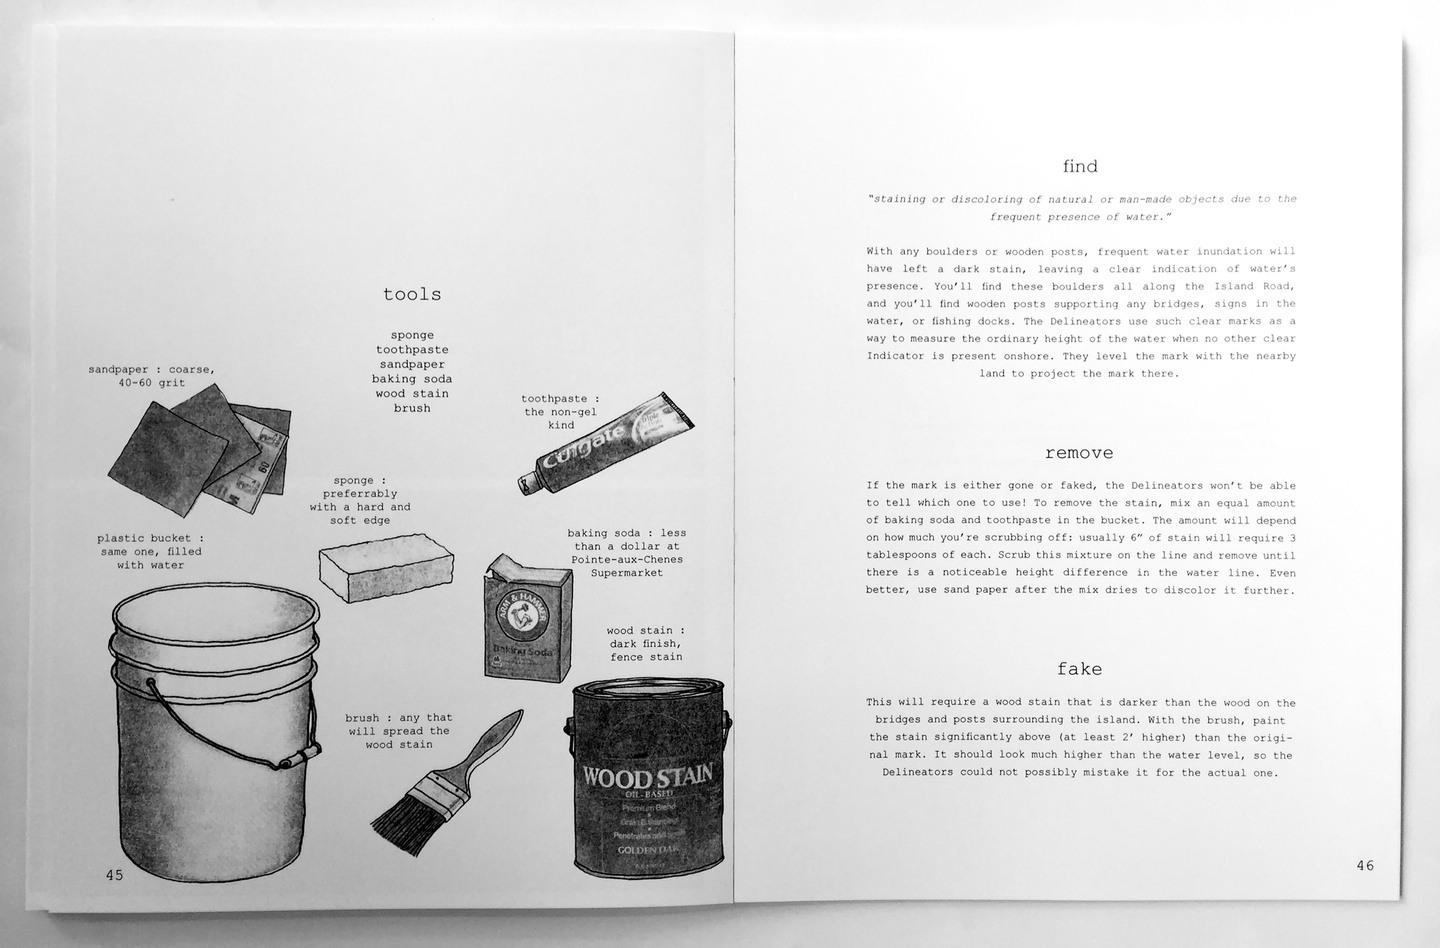 A photograph of a book with drawings of tools on the left and writing on the right all to describe methods of "staining or discoloring natural or man-made objects due to the frequent presence of water"